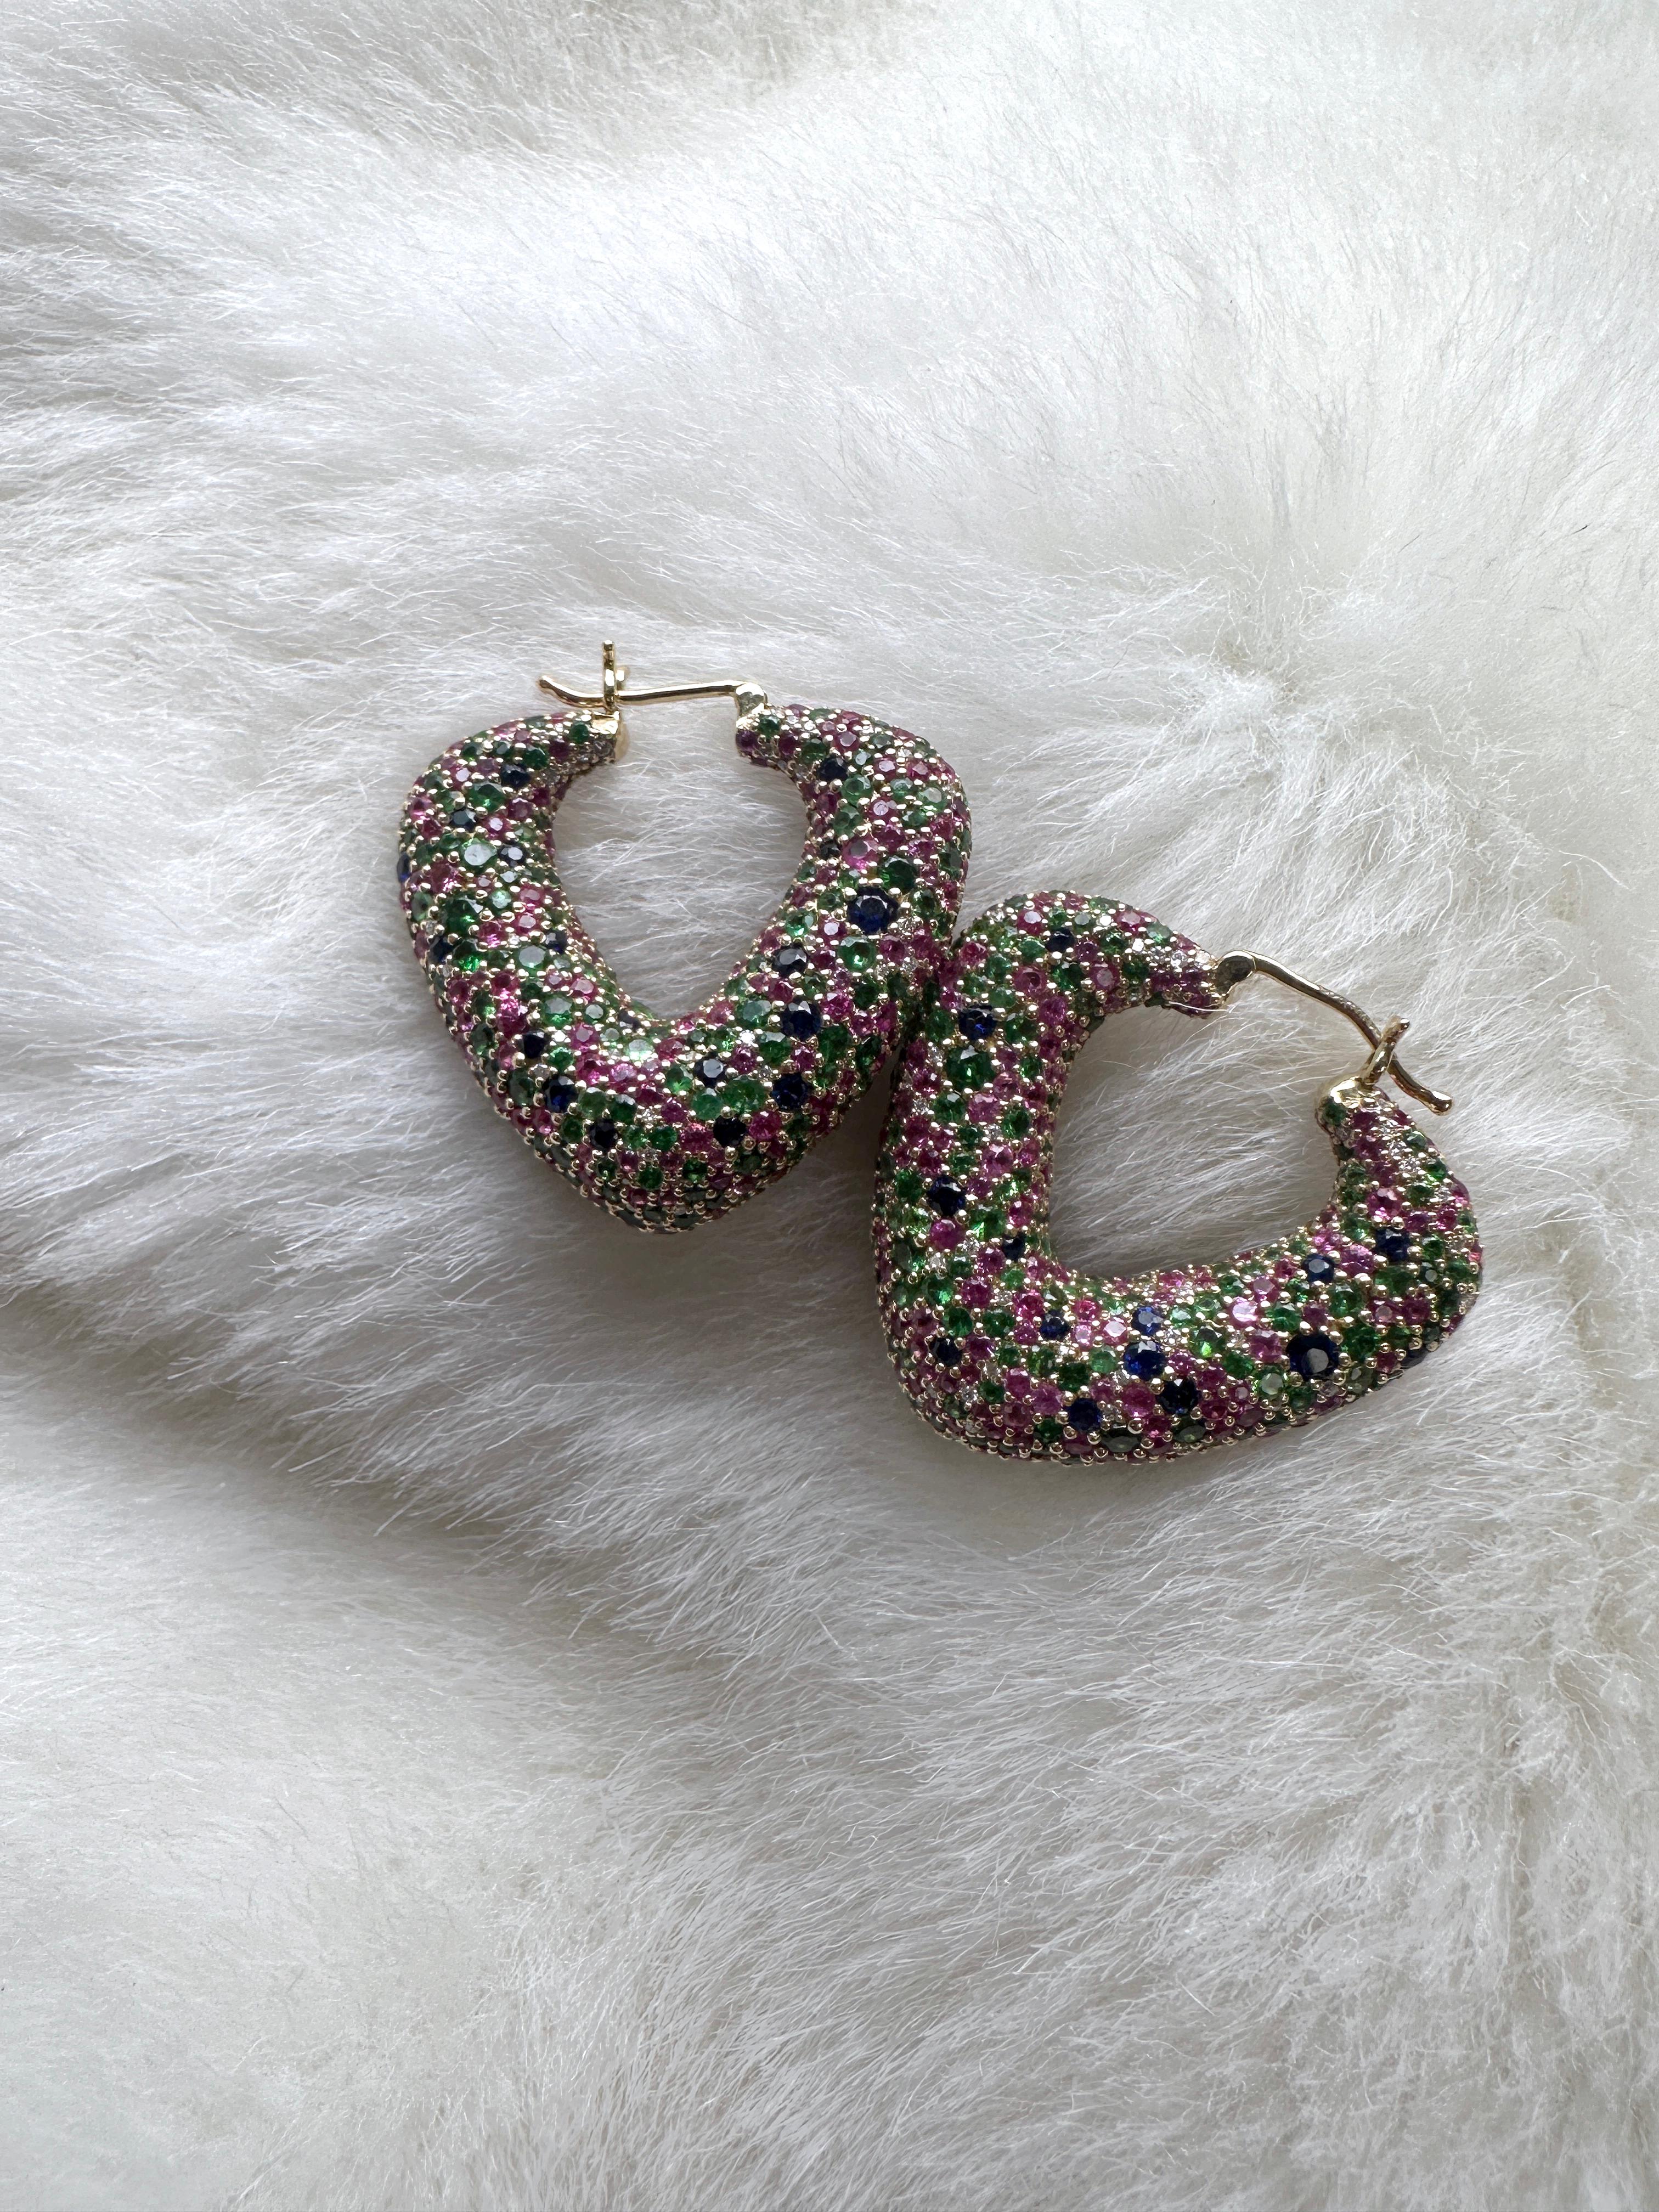 Discover sophistication and brilliance in these Multicolor Blue & Pink Sapphire with Tsavorites & Diamonds Hoop Earrings from the 'G-One' Collection. Crafted in 18K Yellow Gold, these earrings showcase a fusion of blue and pink sapphires, vibrant